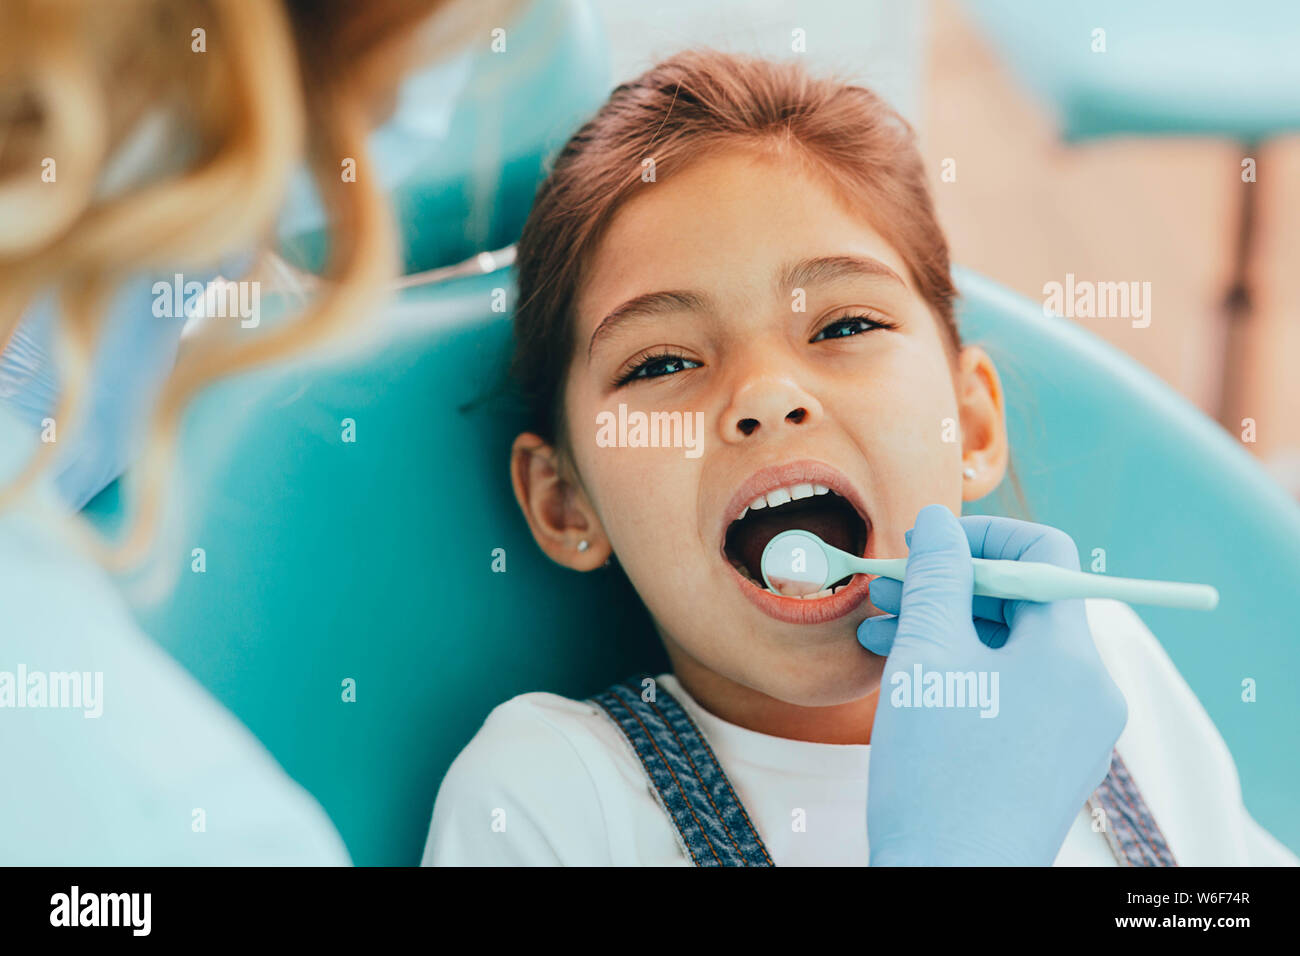 Mixed race girl getting her teeth examined with dental mirror Stock Photo